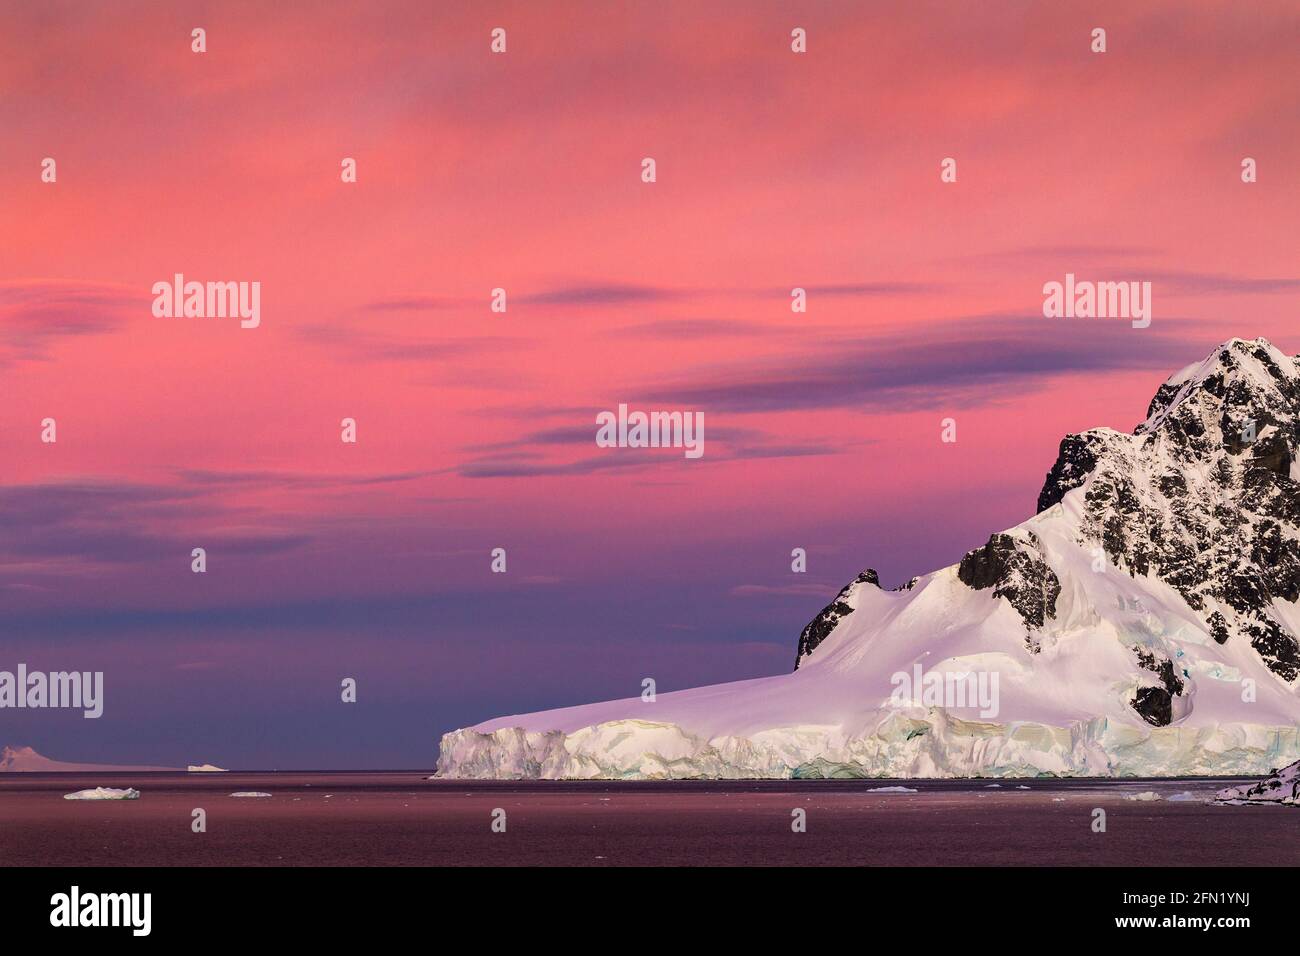 A magical sunset in Antarctica. Stock Photo